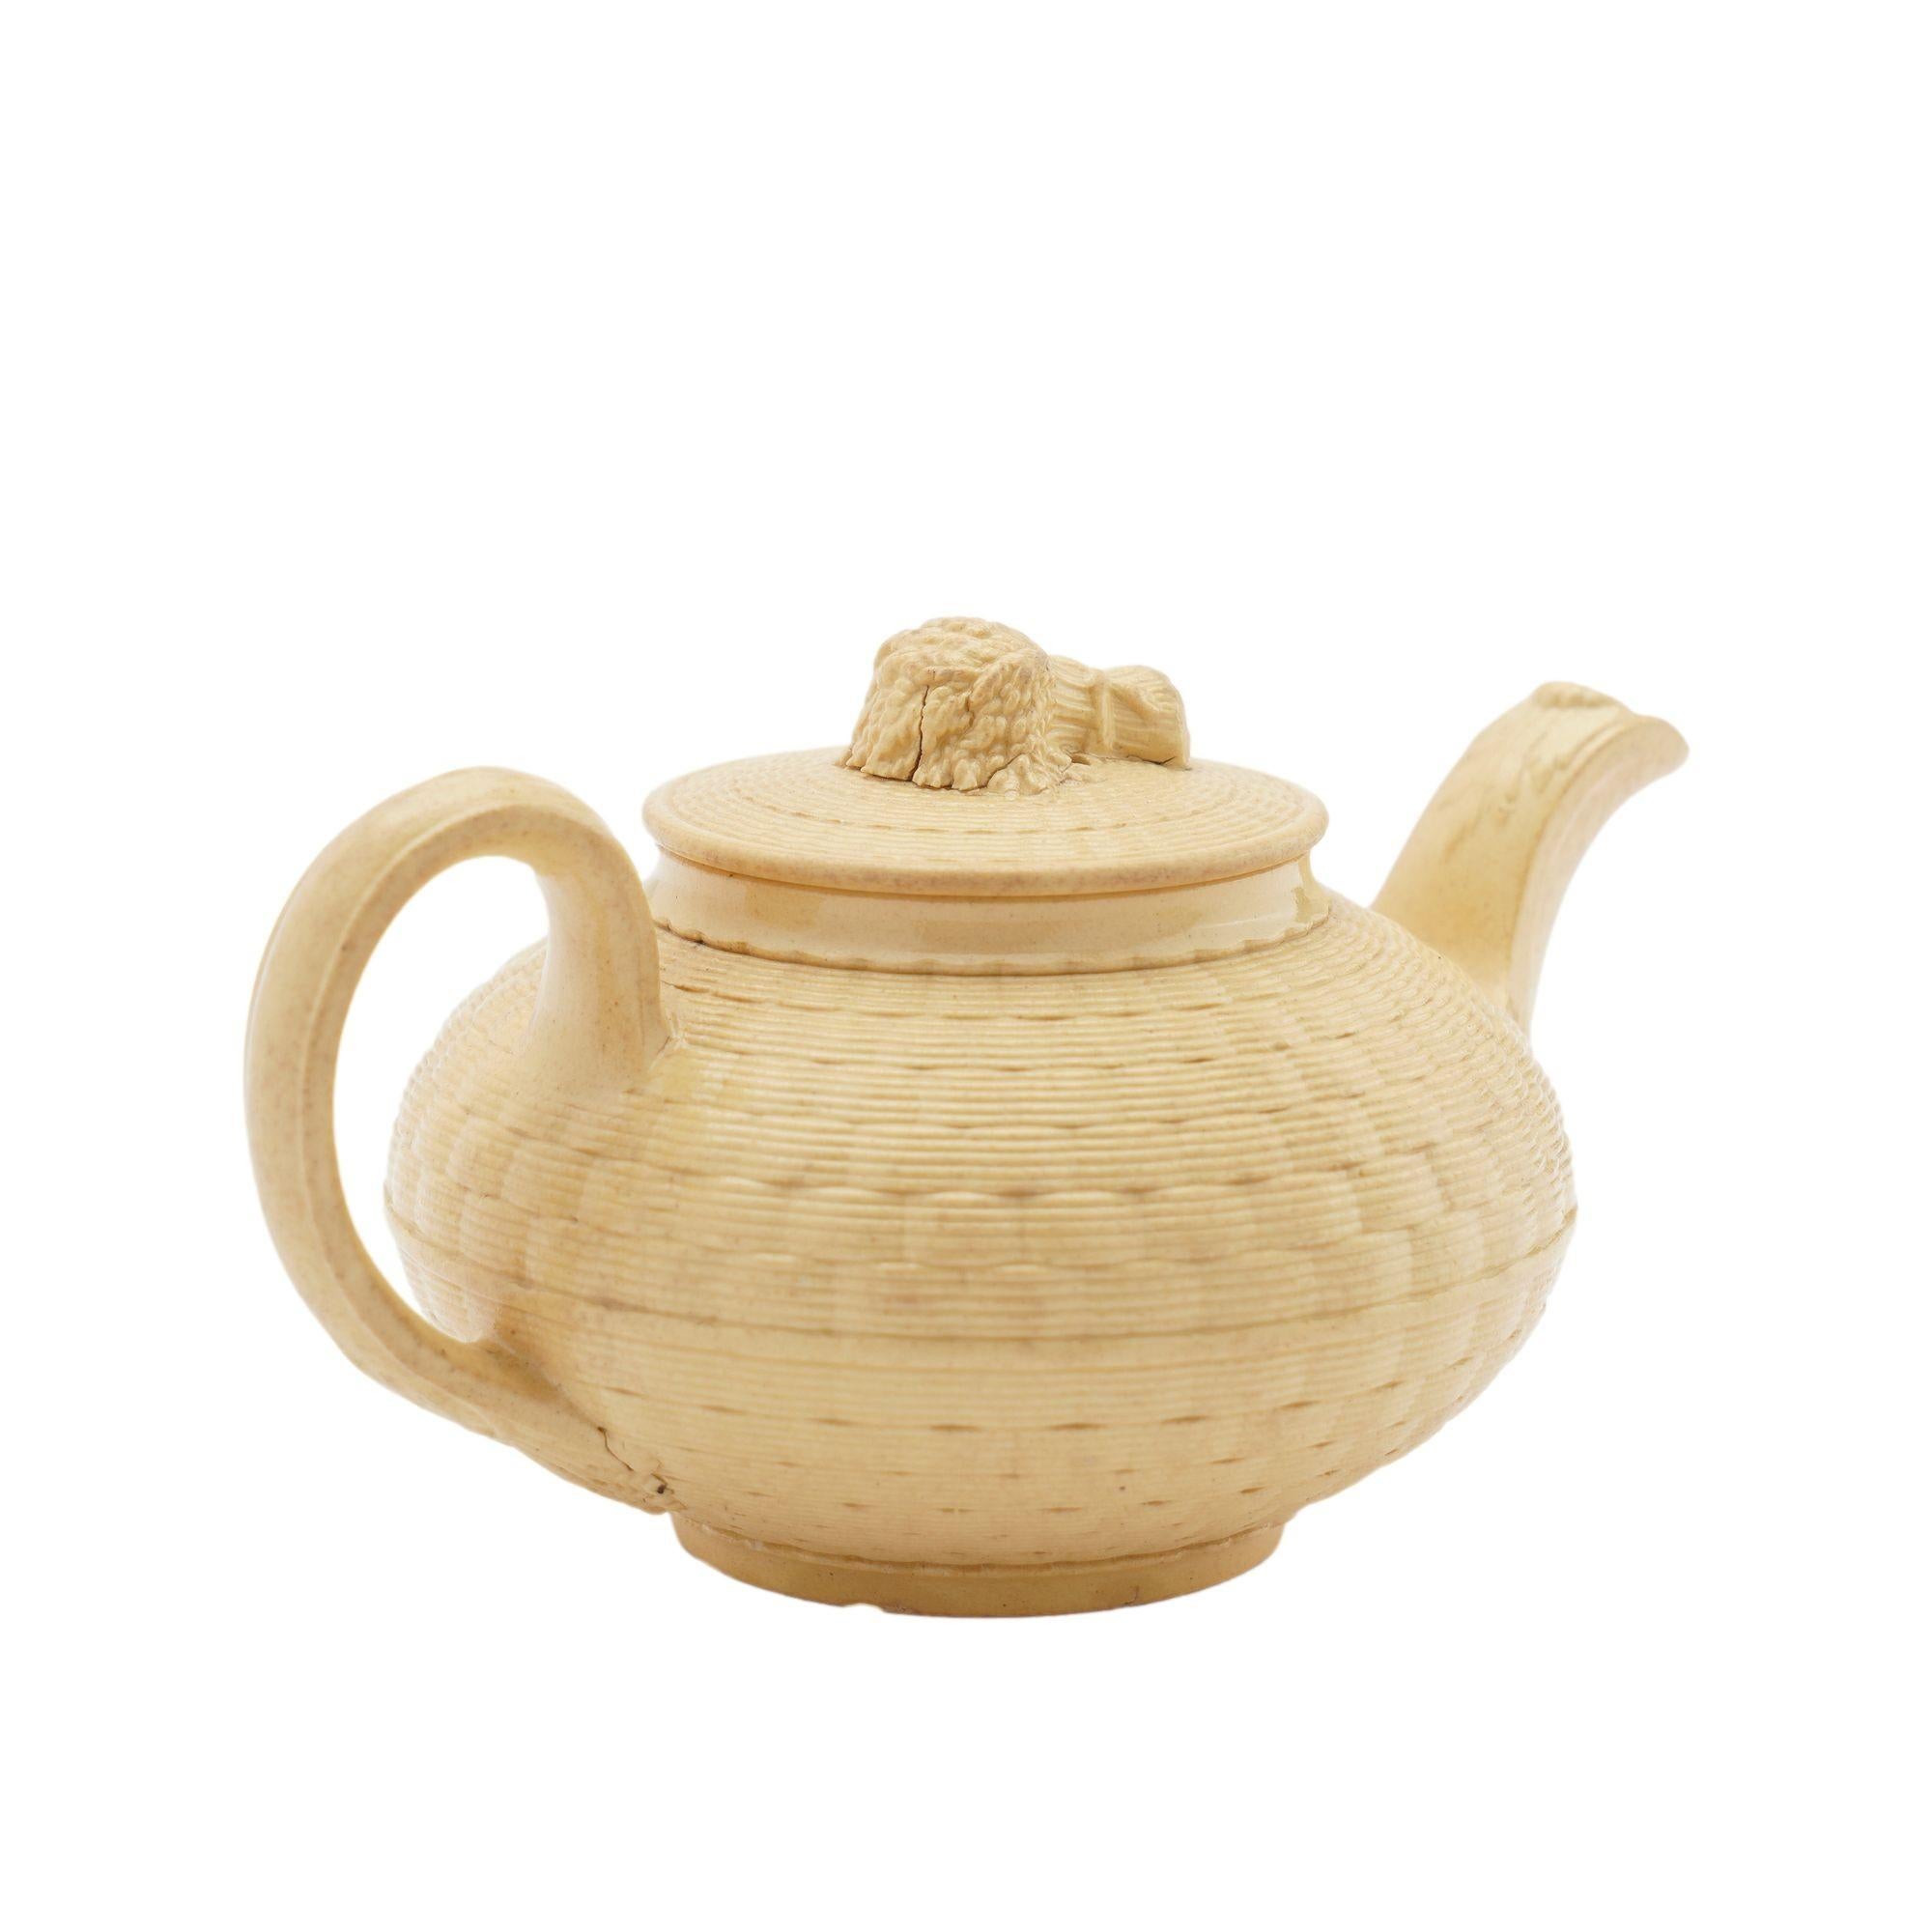 Caneware creamer and teapot by Wedgwood, c. 1817 For Sale 2